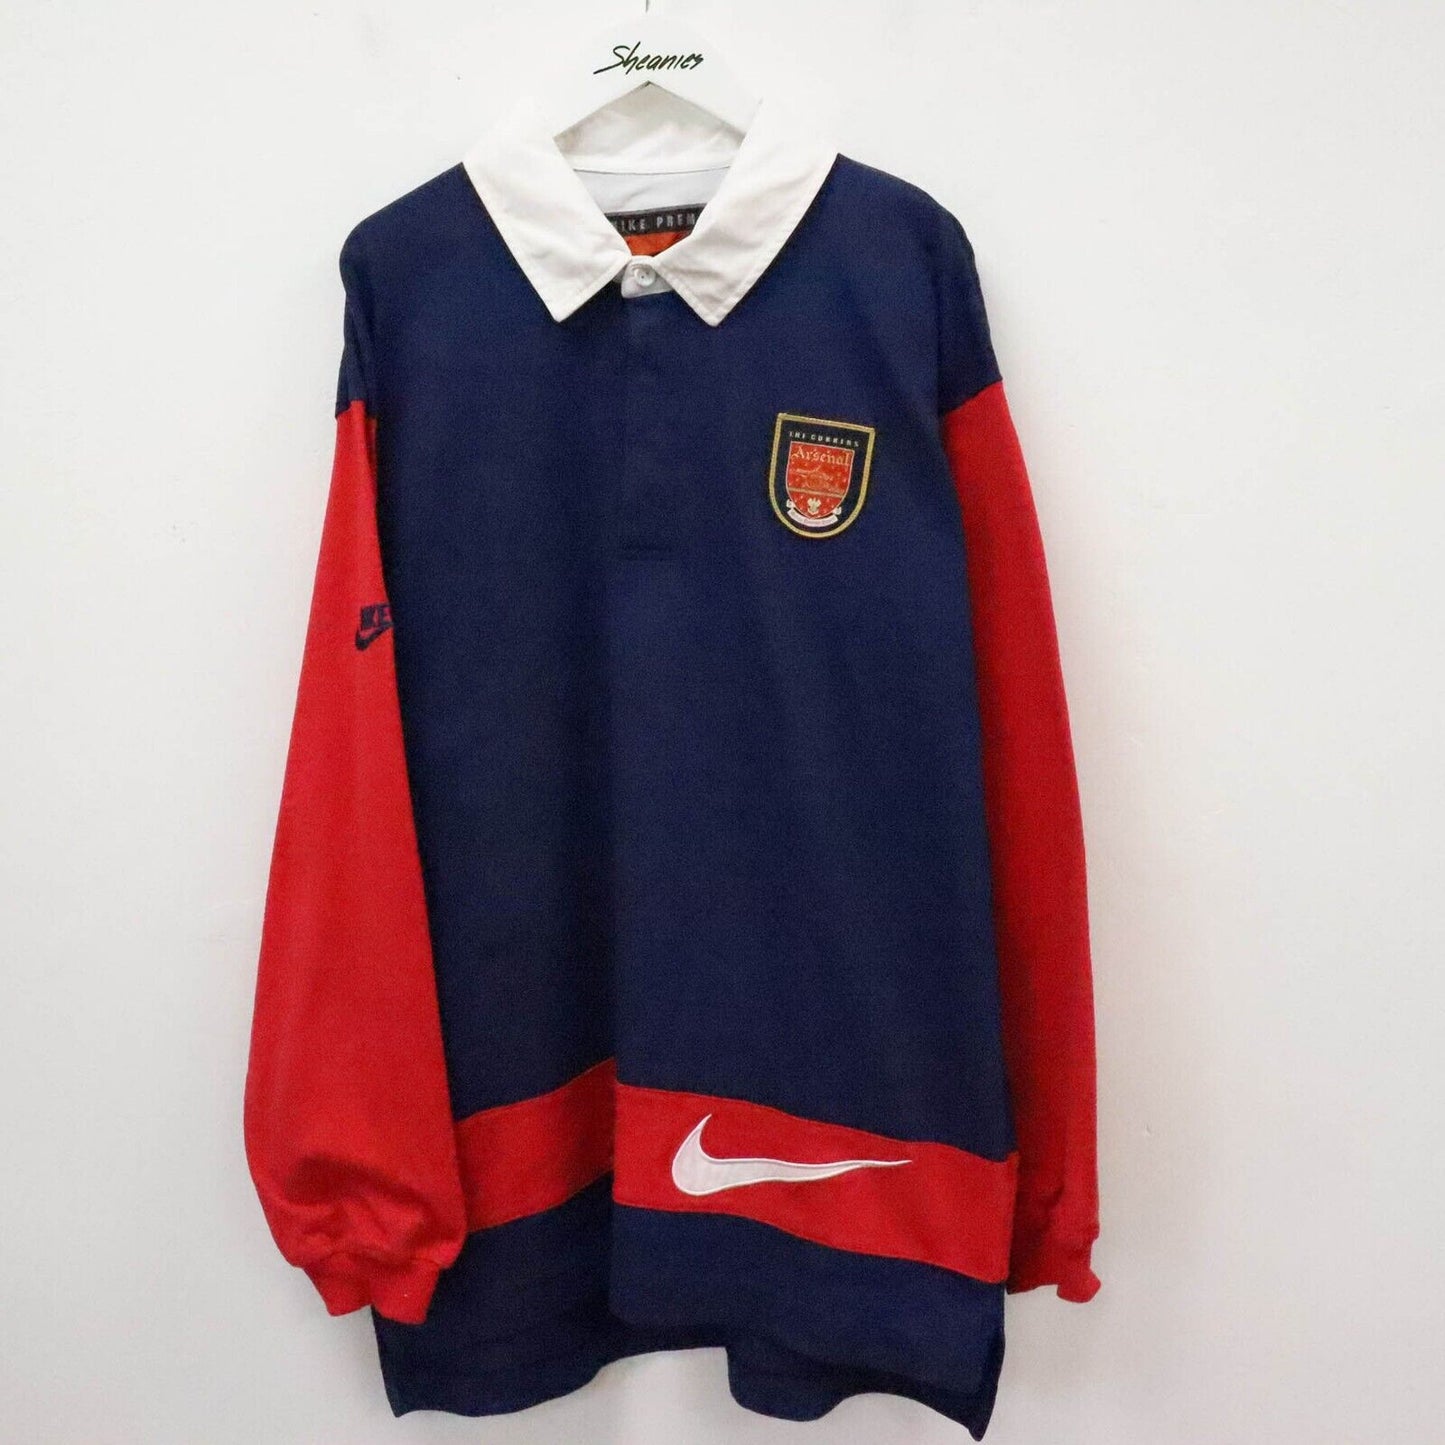 00s Nike Arsenal Rugby Shirt Size L